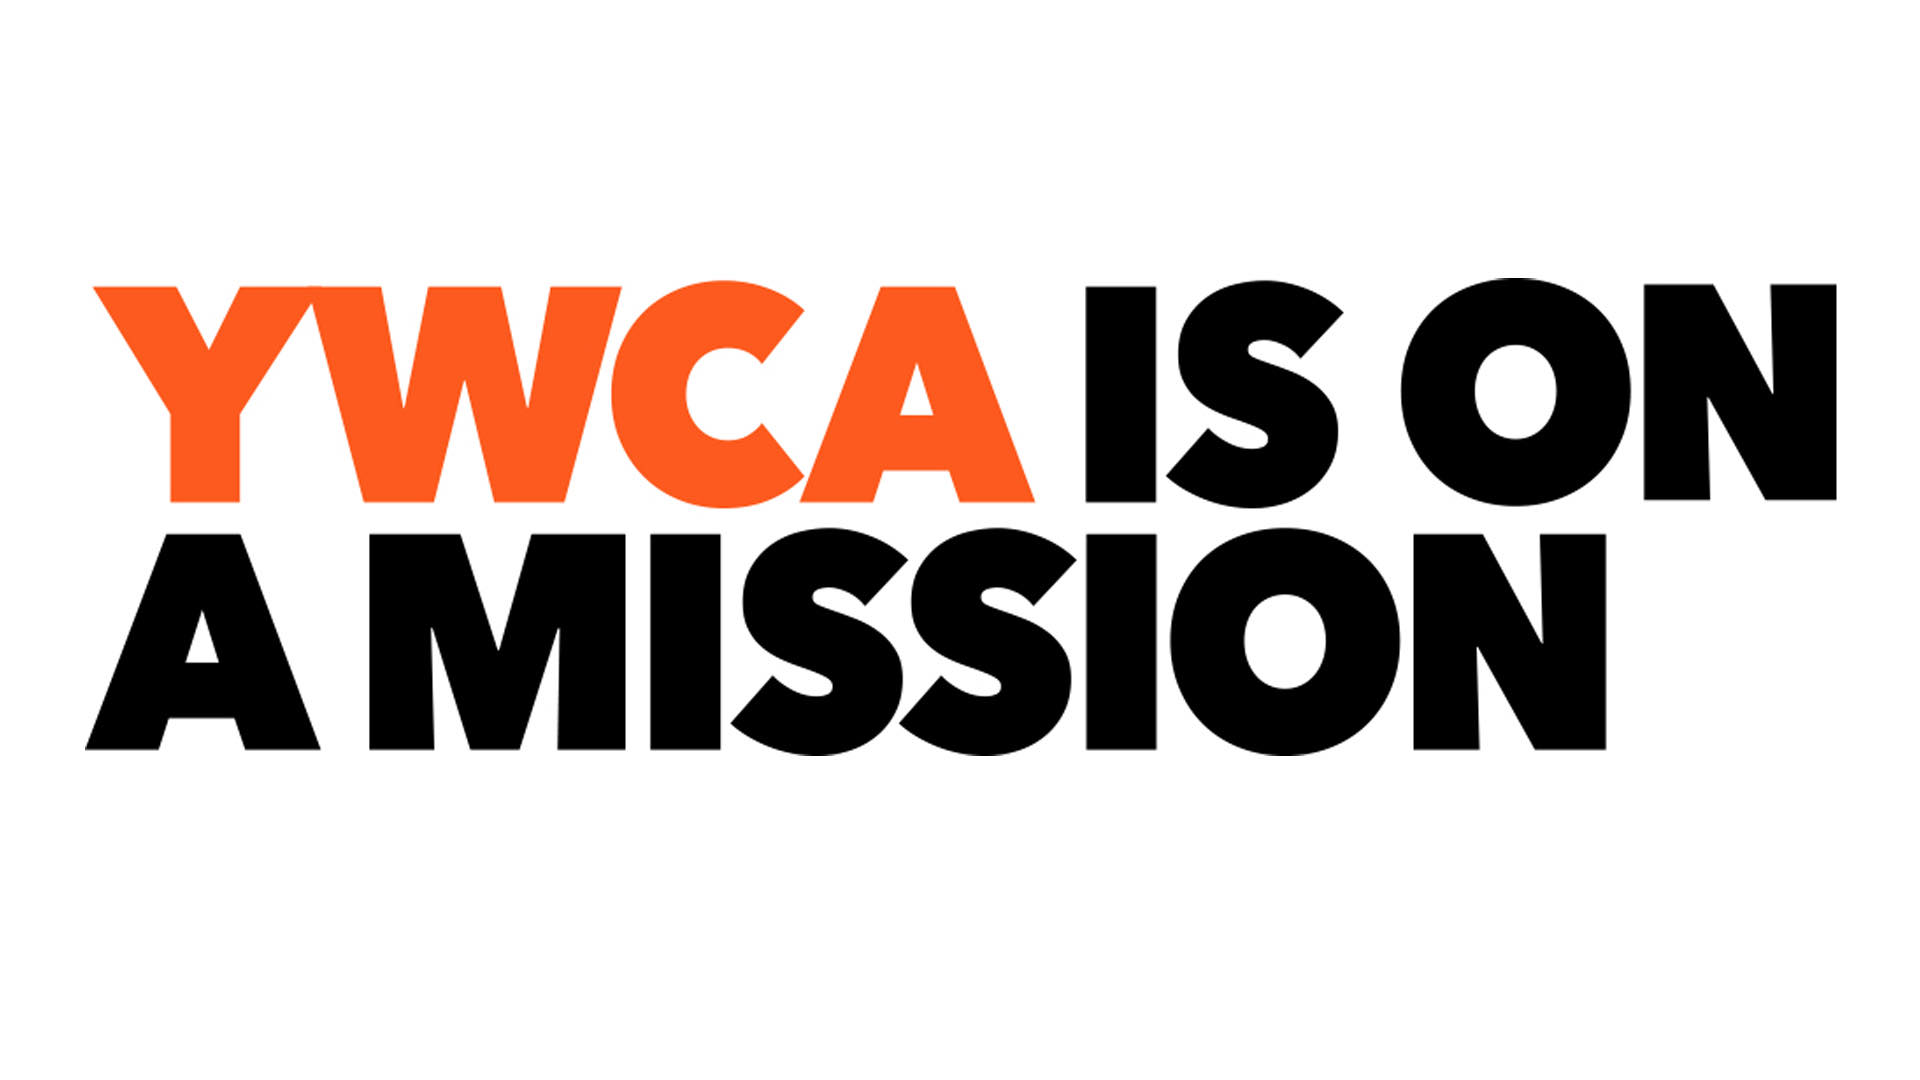 Planned Giving - YWCA Central Maine